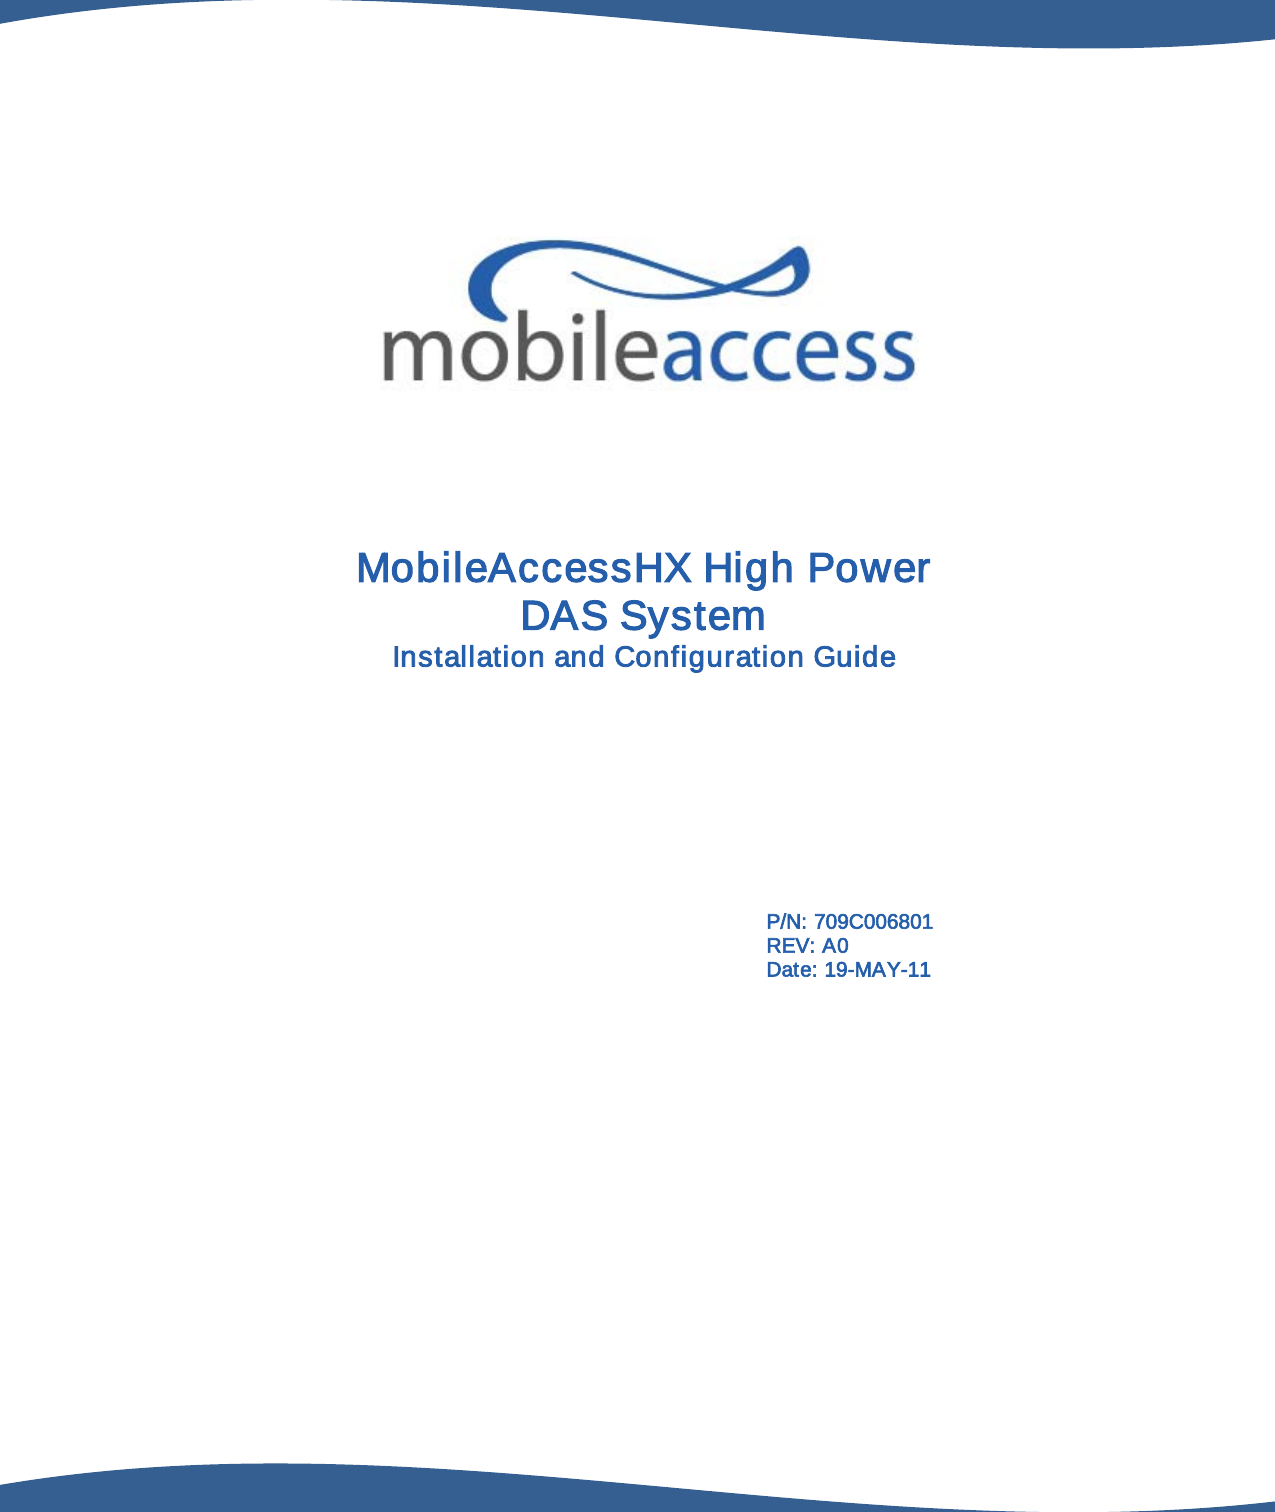                                                  MobileAccessHX High Power DAS System Installation and Configuration Guide P/N: 709C006801 REV: A0 Date: 19-MAY-11  